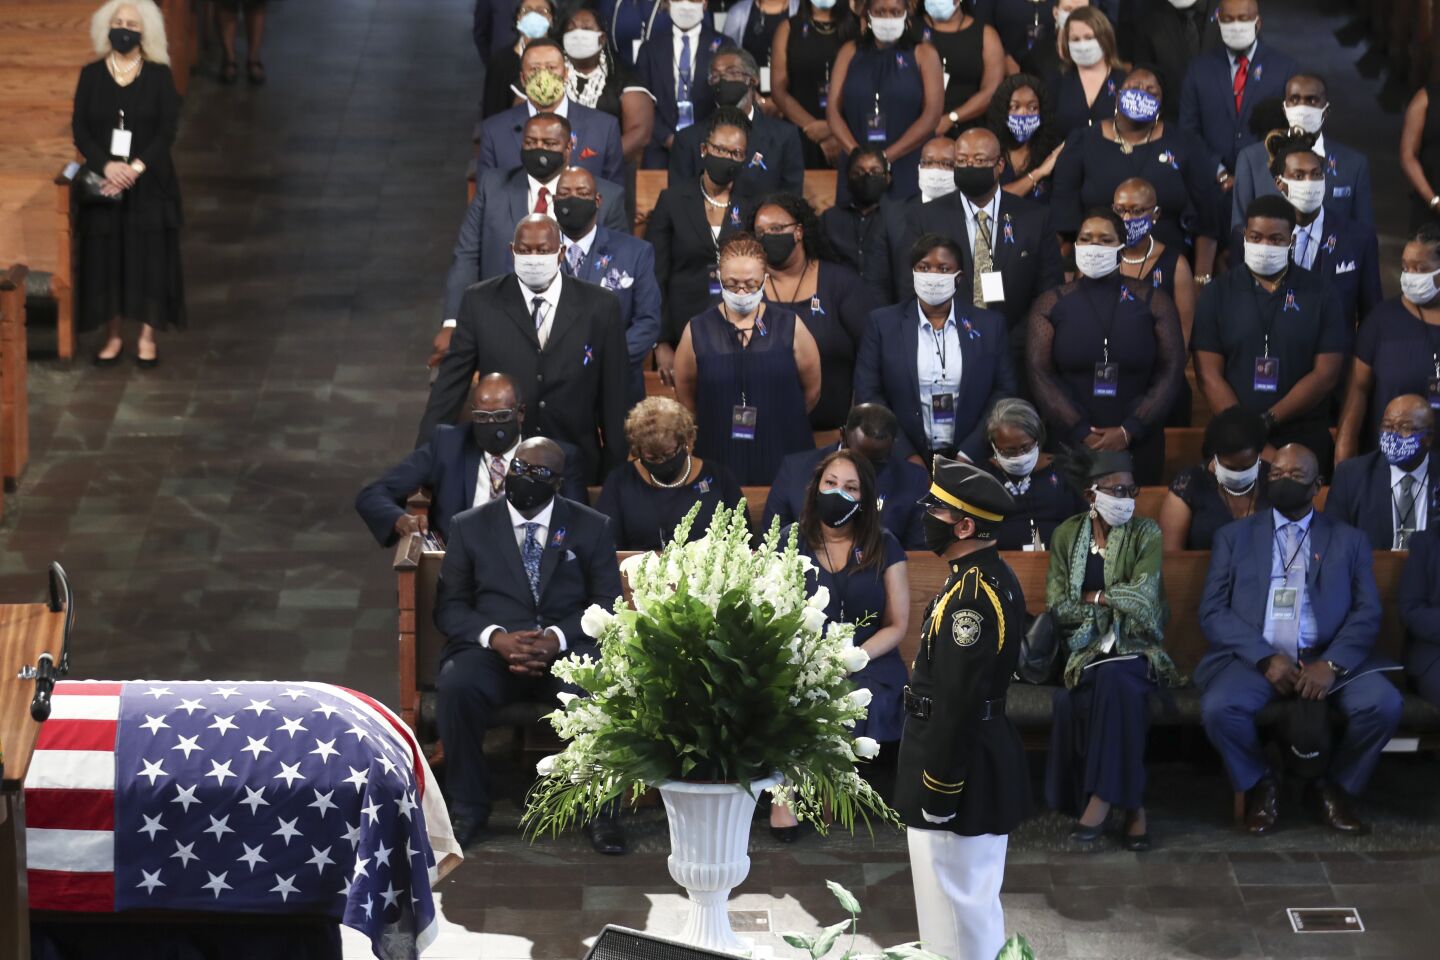 Mourners attend the funeral service for Rep. John Lewis at Ebenezer Baptist Church in Atlanta.